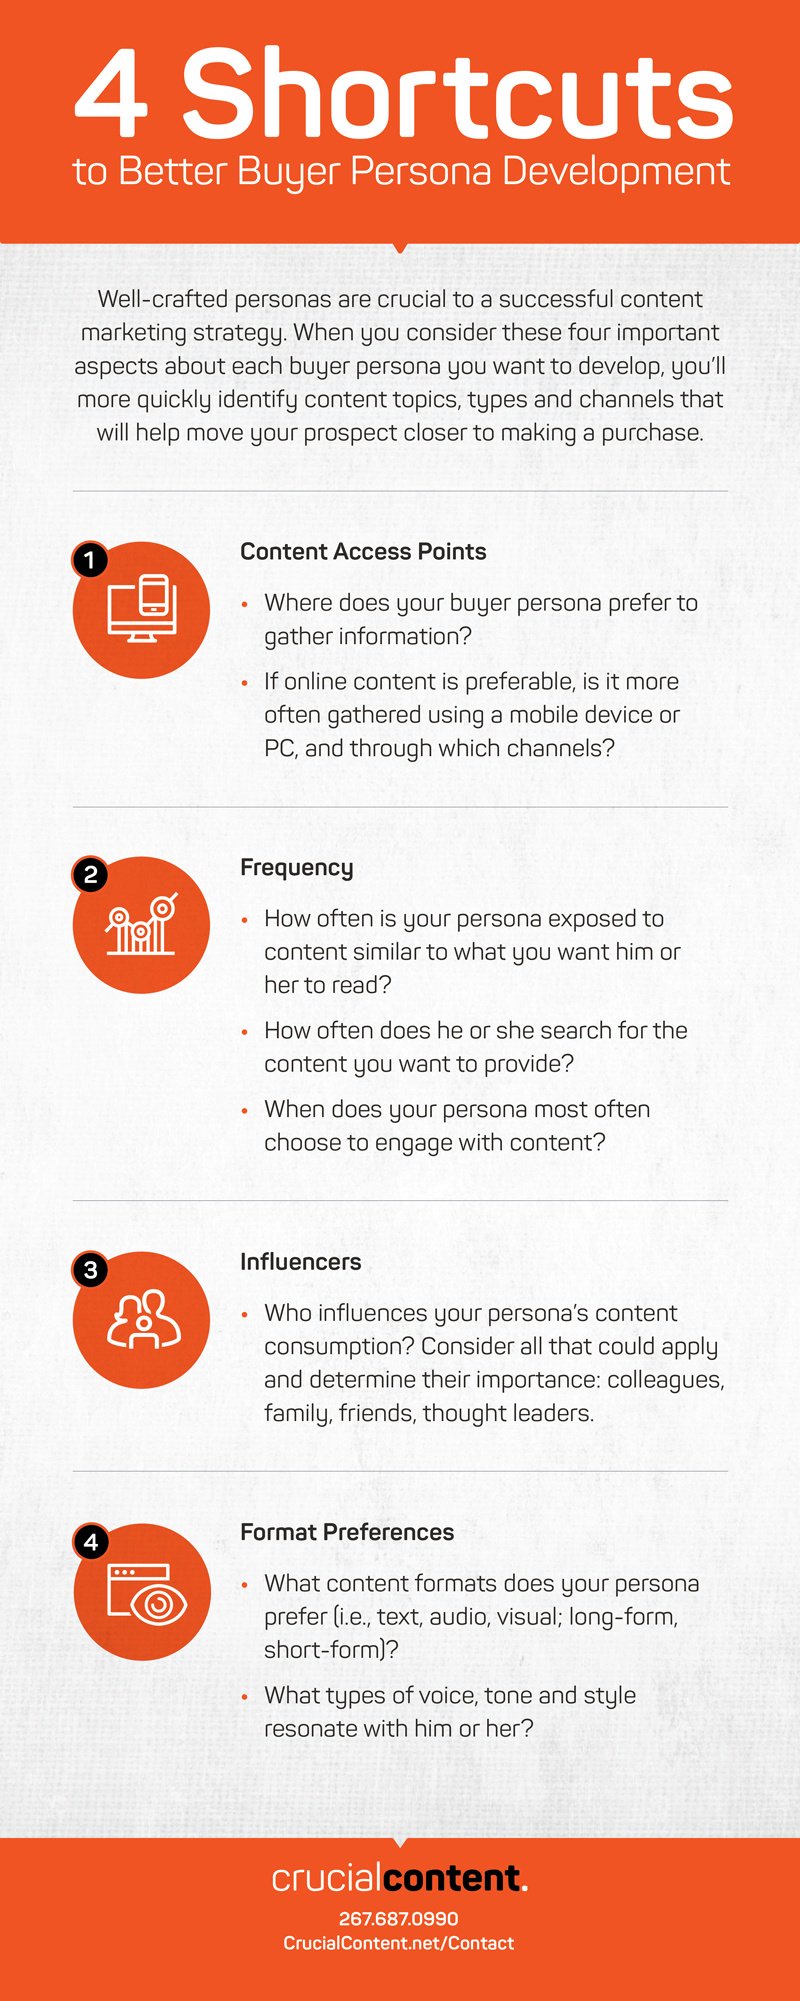 4 shortcuts to better buyer persona development infographic